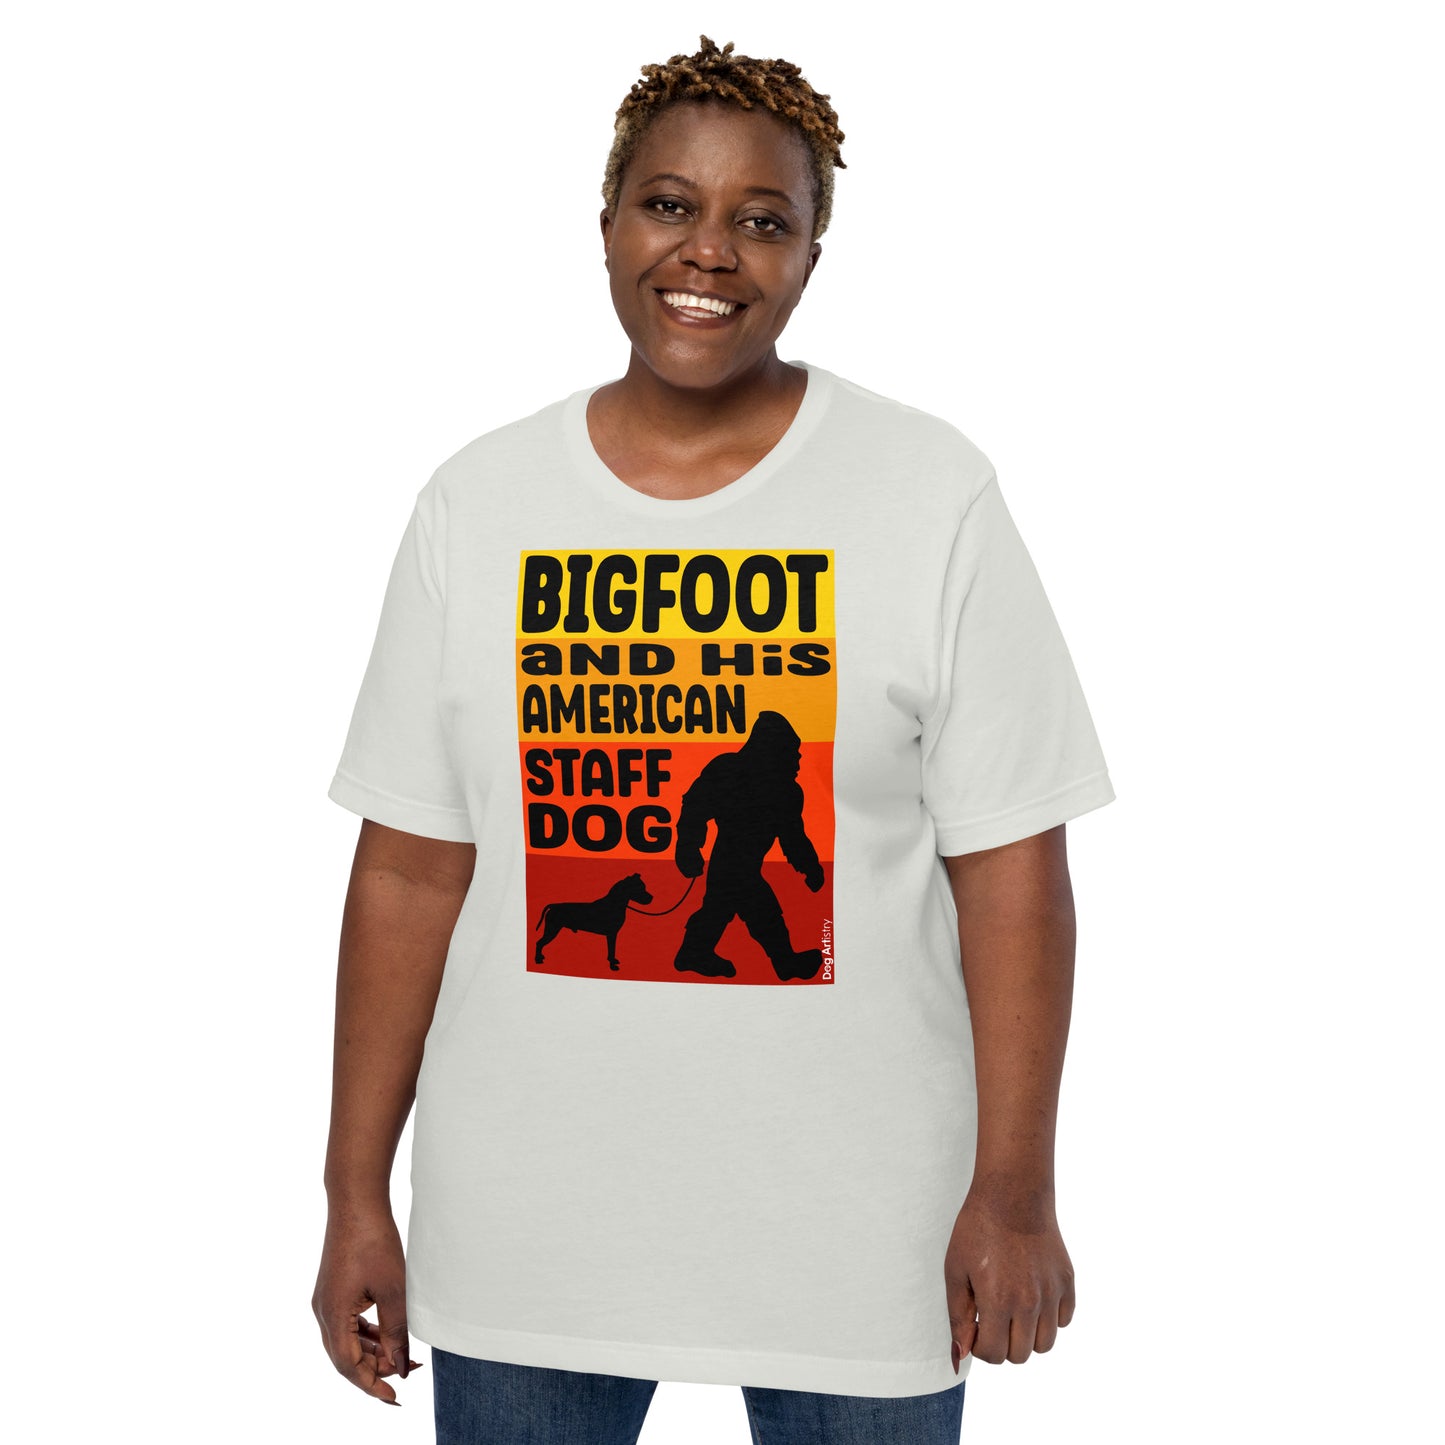 Bigfoot and his American Staffordshire Terrier unisex silver t-shirt-by-Dog-Artistry.